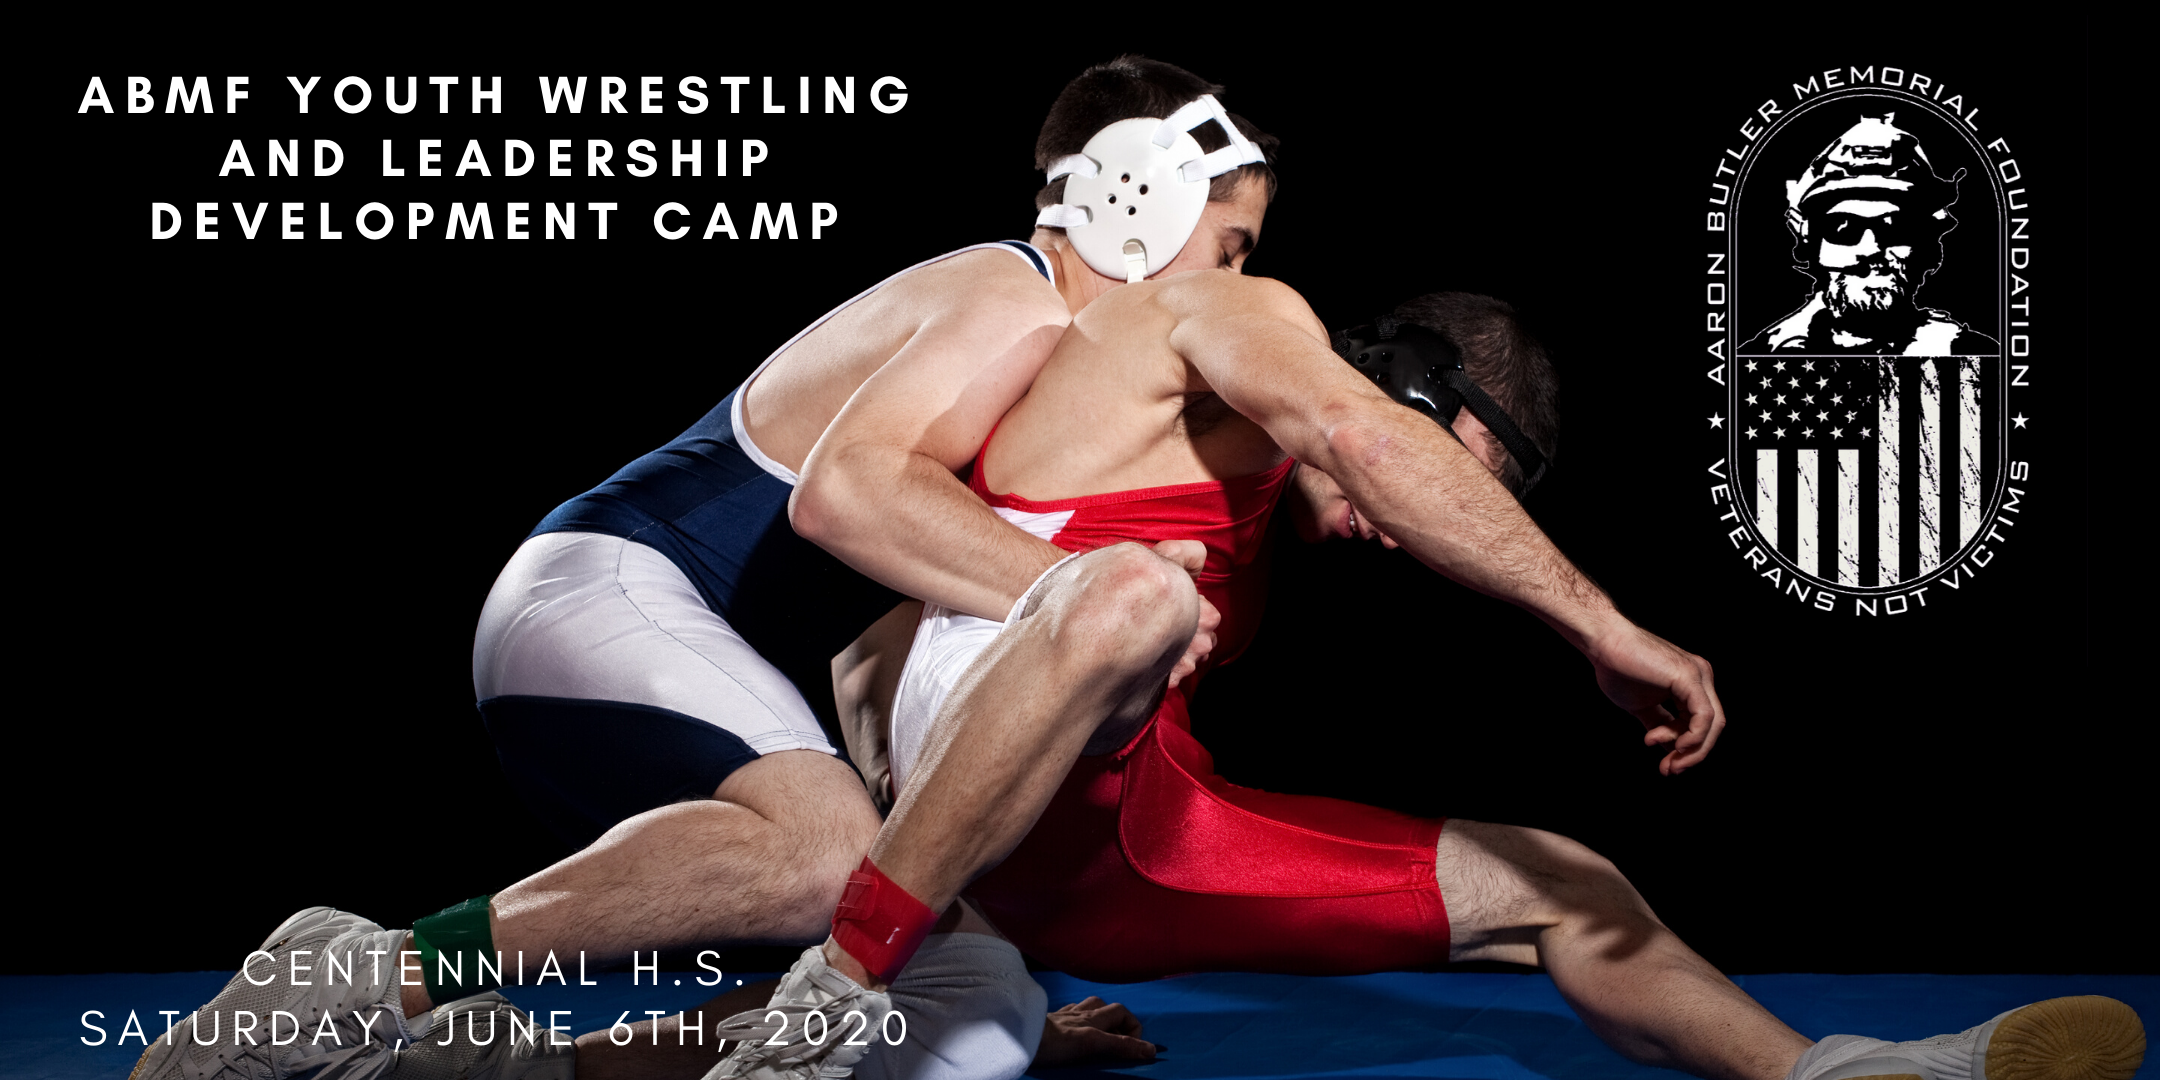 ABMF Youth Wrestling and Leadership Development Camp